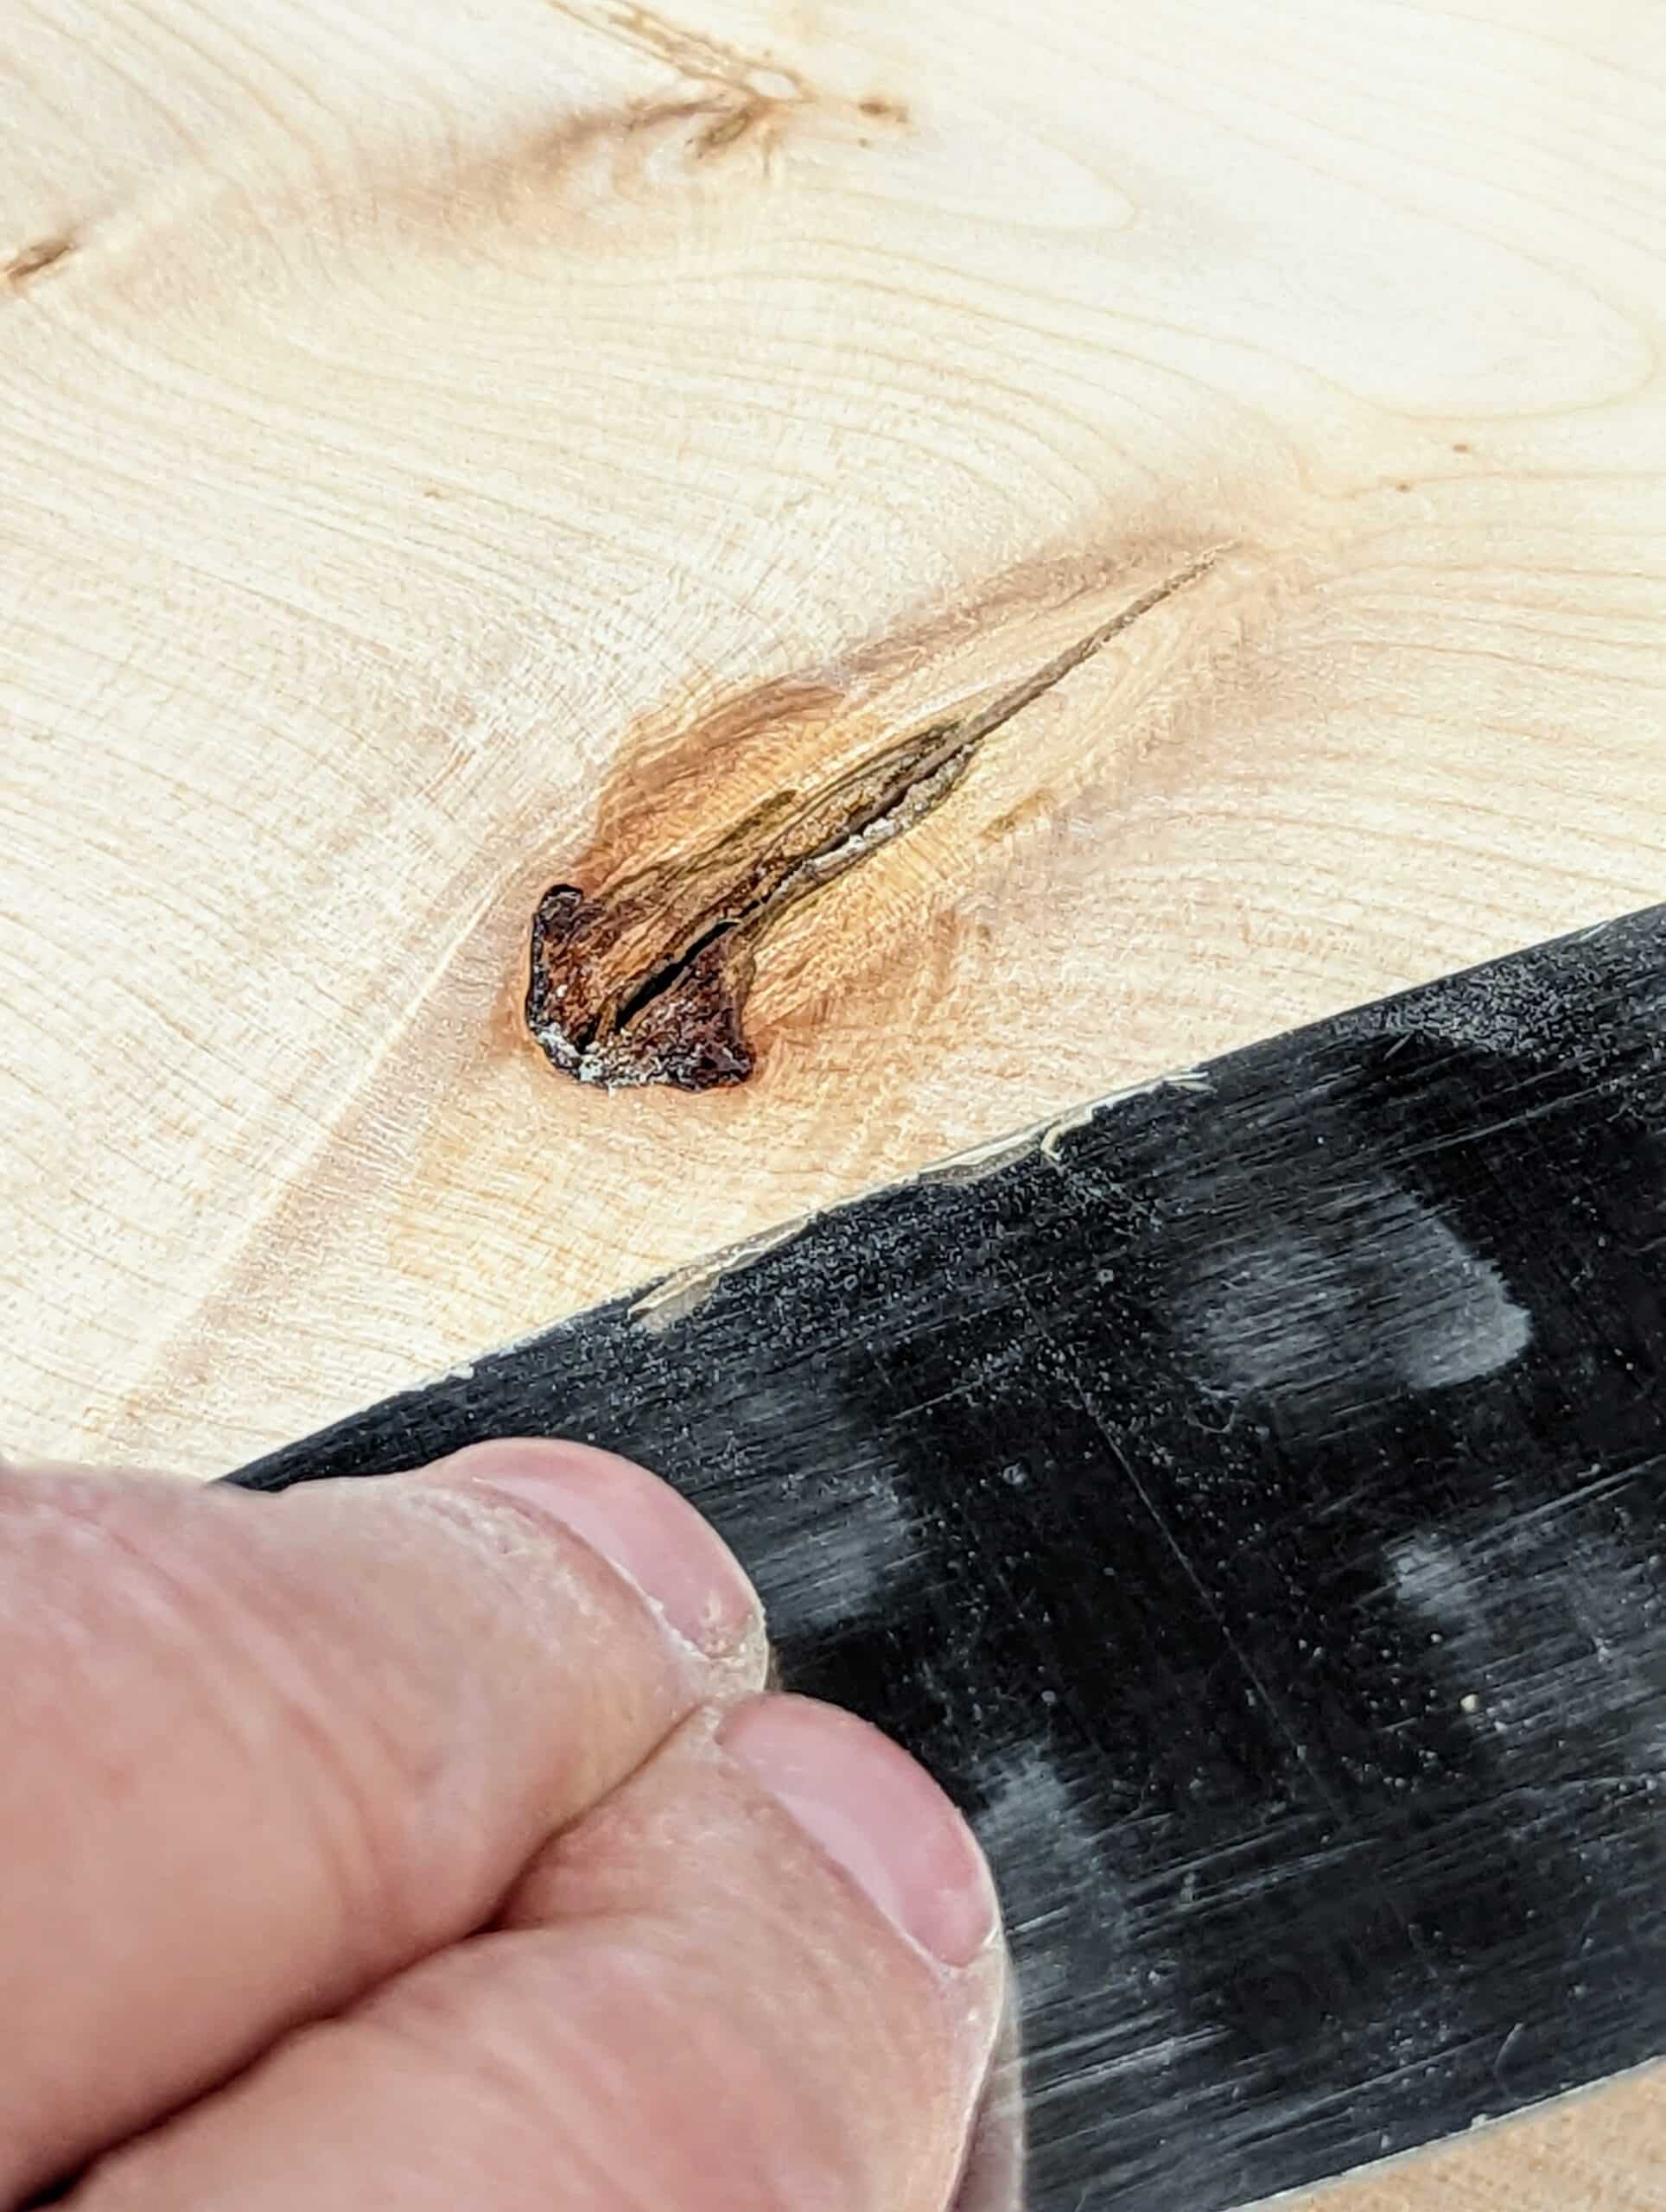 5 Best Epoxy Wood Fillers for Voids and Rotting Wood